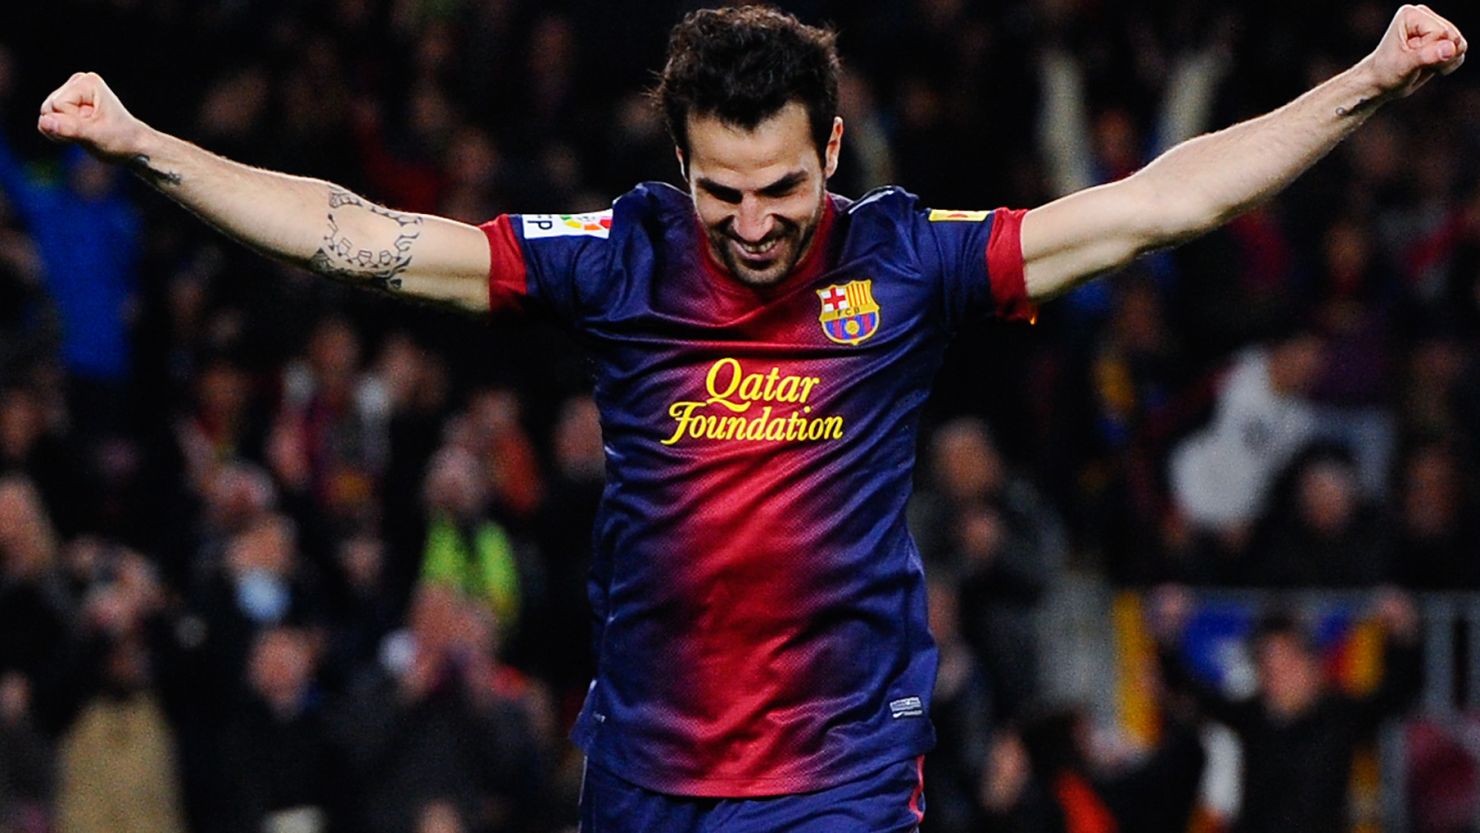 Cesc Fabregas celebrates after completing his hat-trick with Barcelona's fifth goal against Mallorca on Saturday.